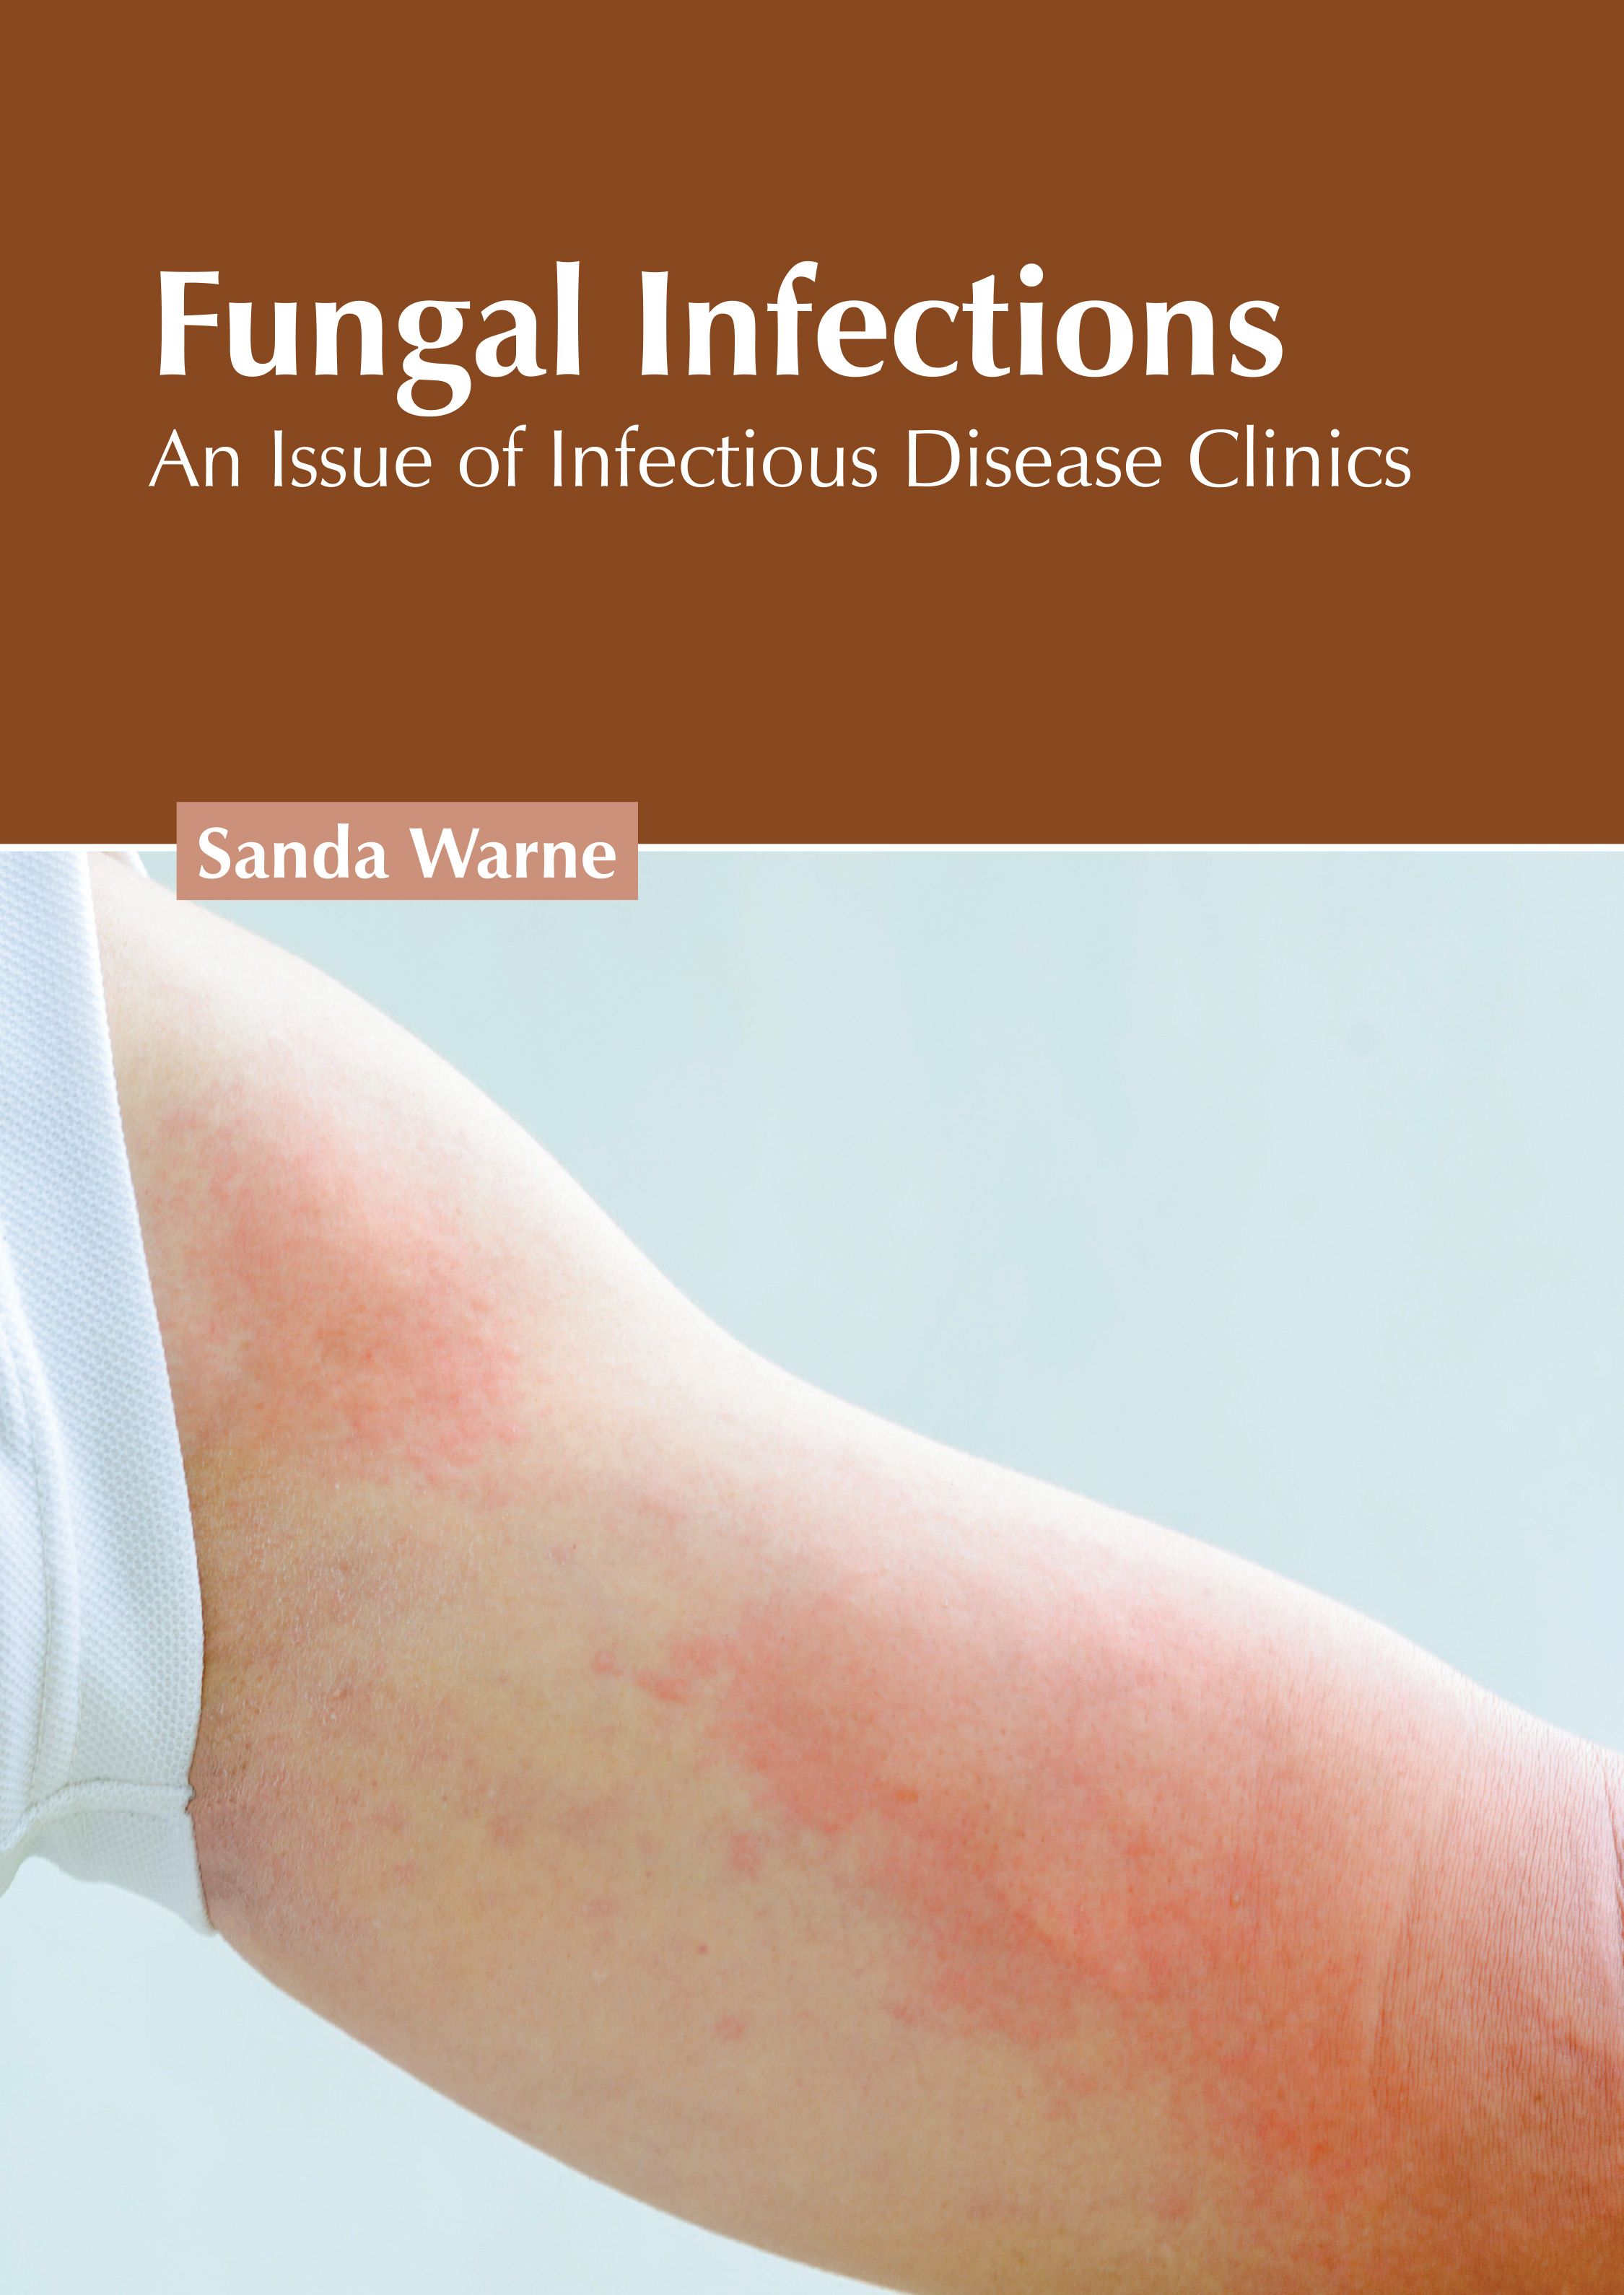 FUNGAL INFECTIONS: AN ISSUE OF INFECTIOUS DISEASE CLINICS